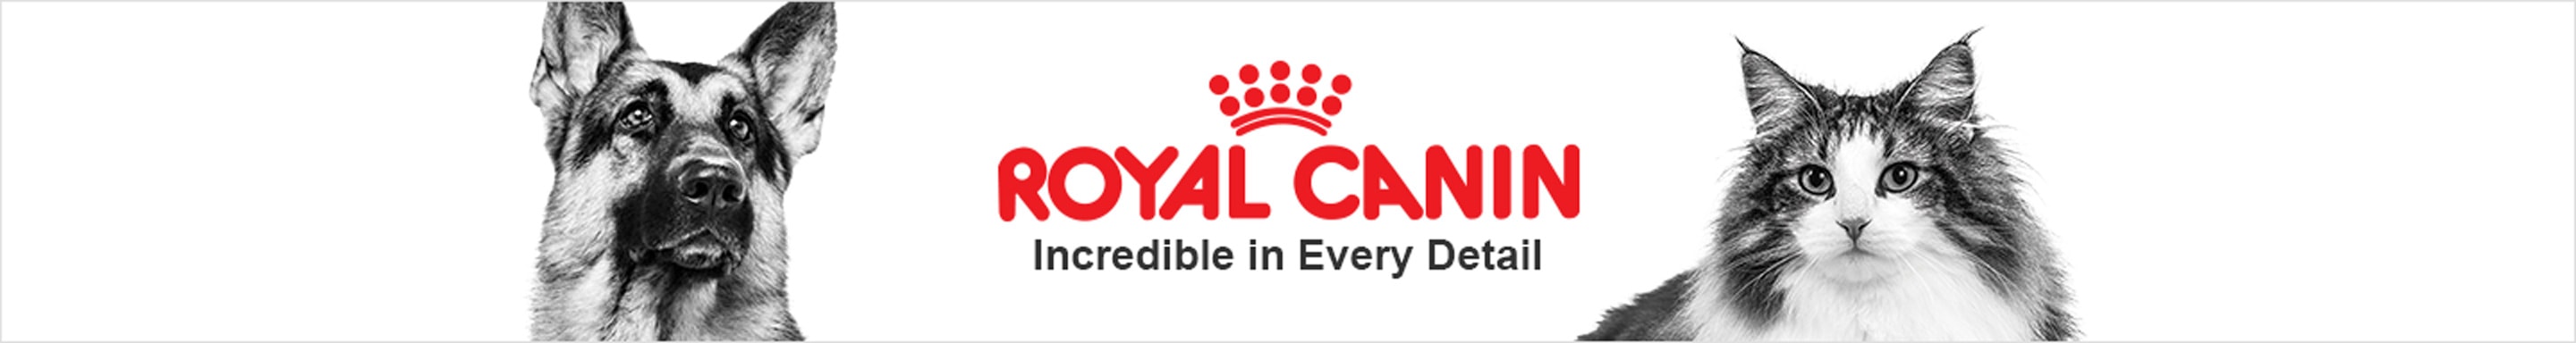 Royal Canin Cat & Dog Food: Day Delivery | Petco